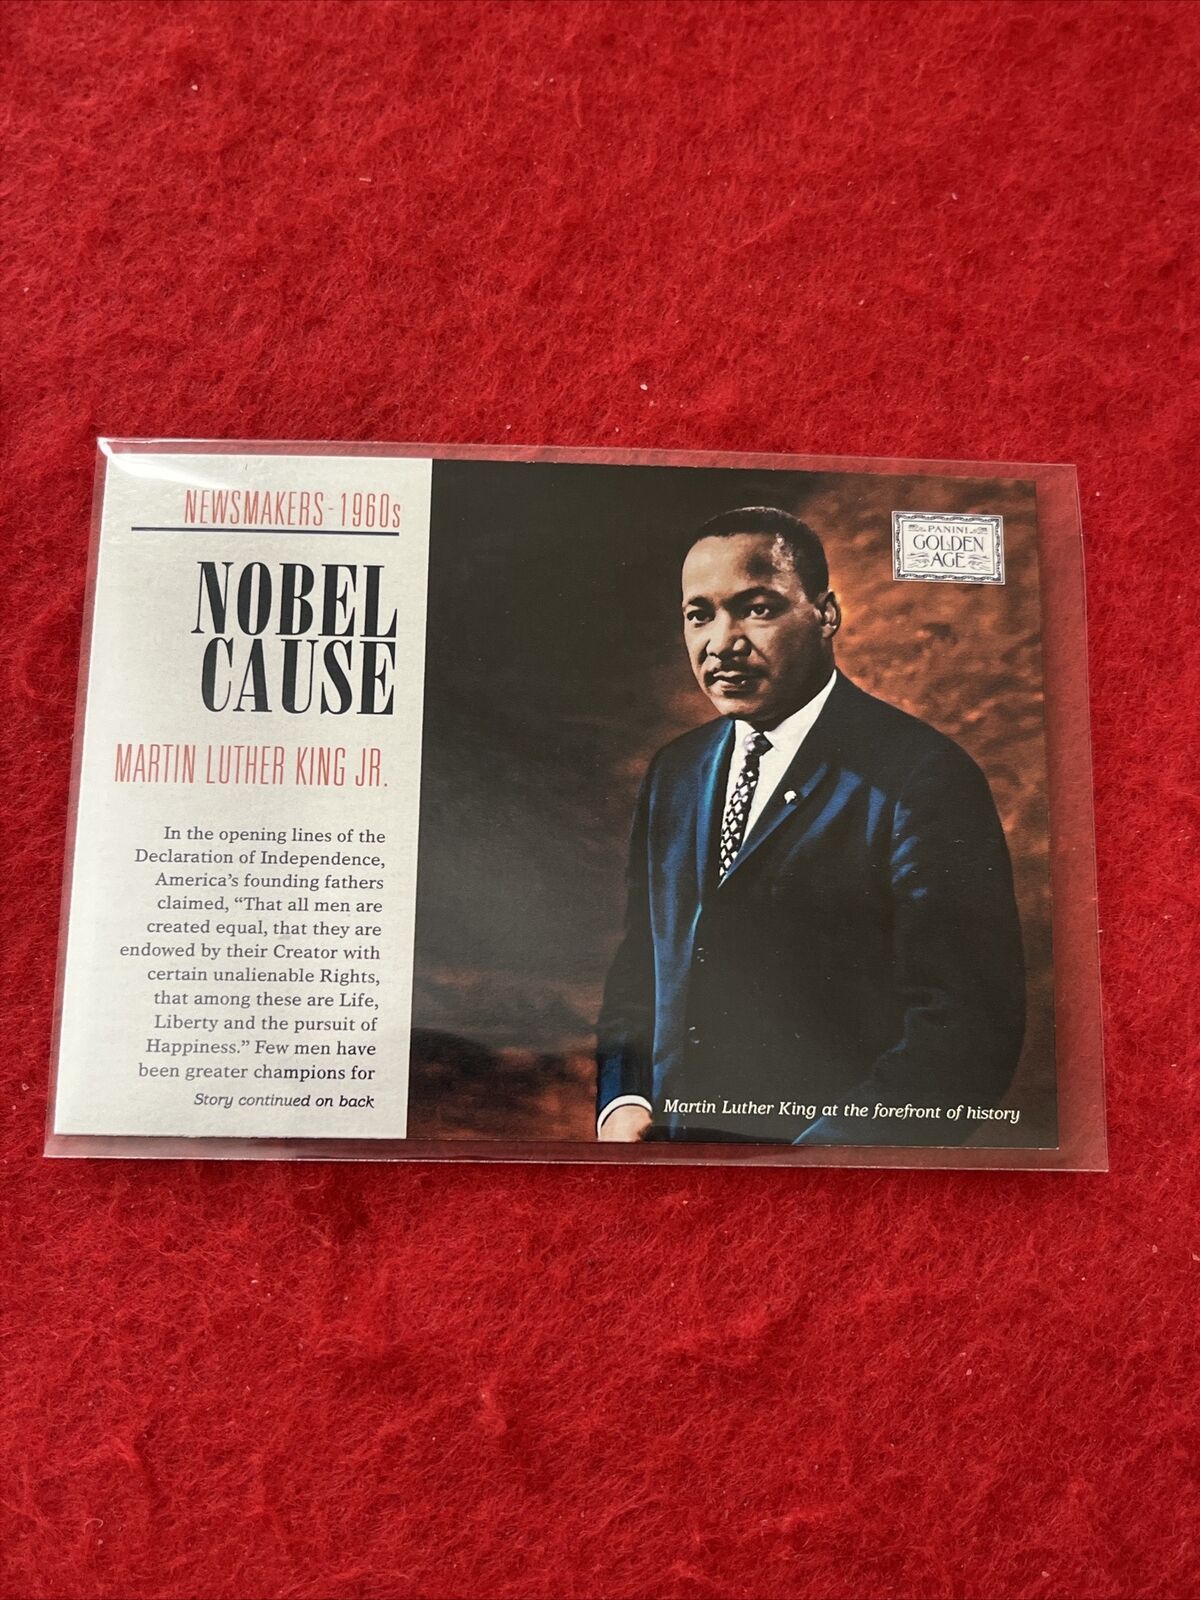 2014 Panini Golden Age “Nobel Cause” Dr. MARTIN LUTHER KING Card #7   NM-MT